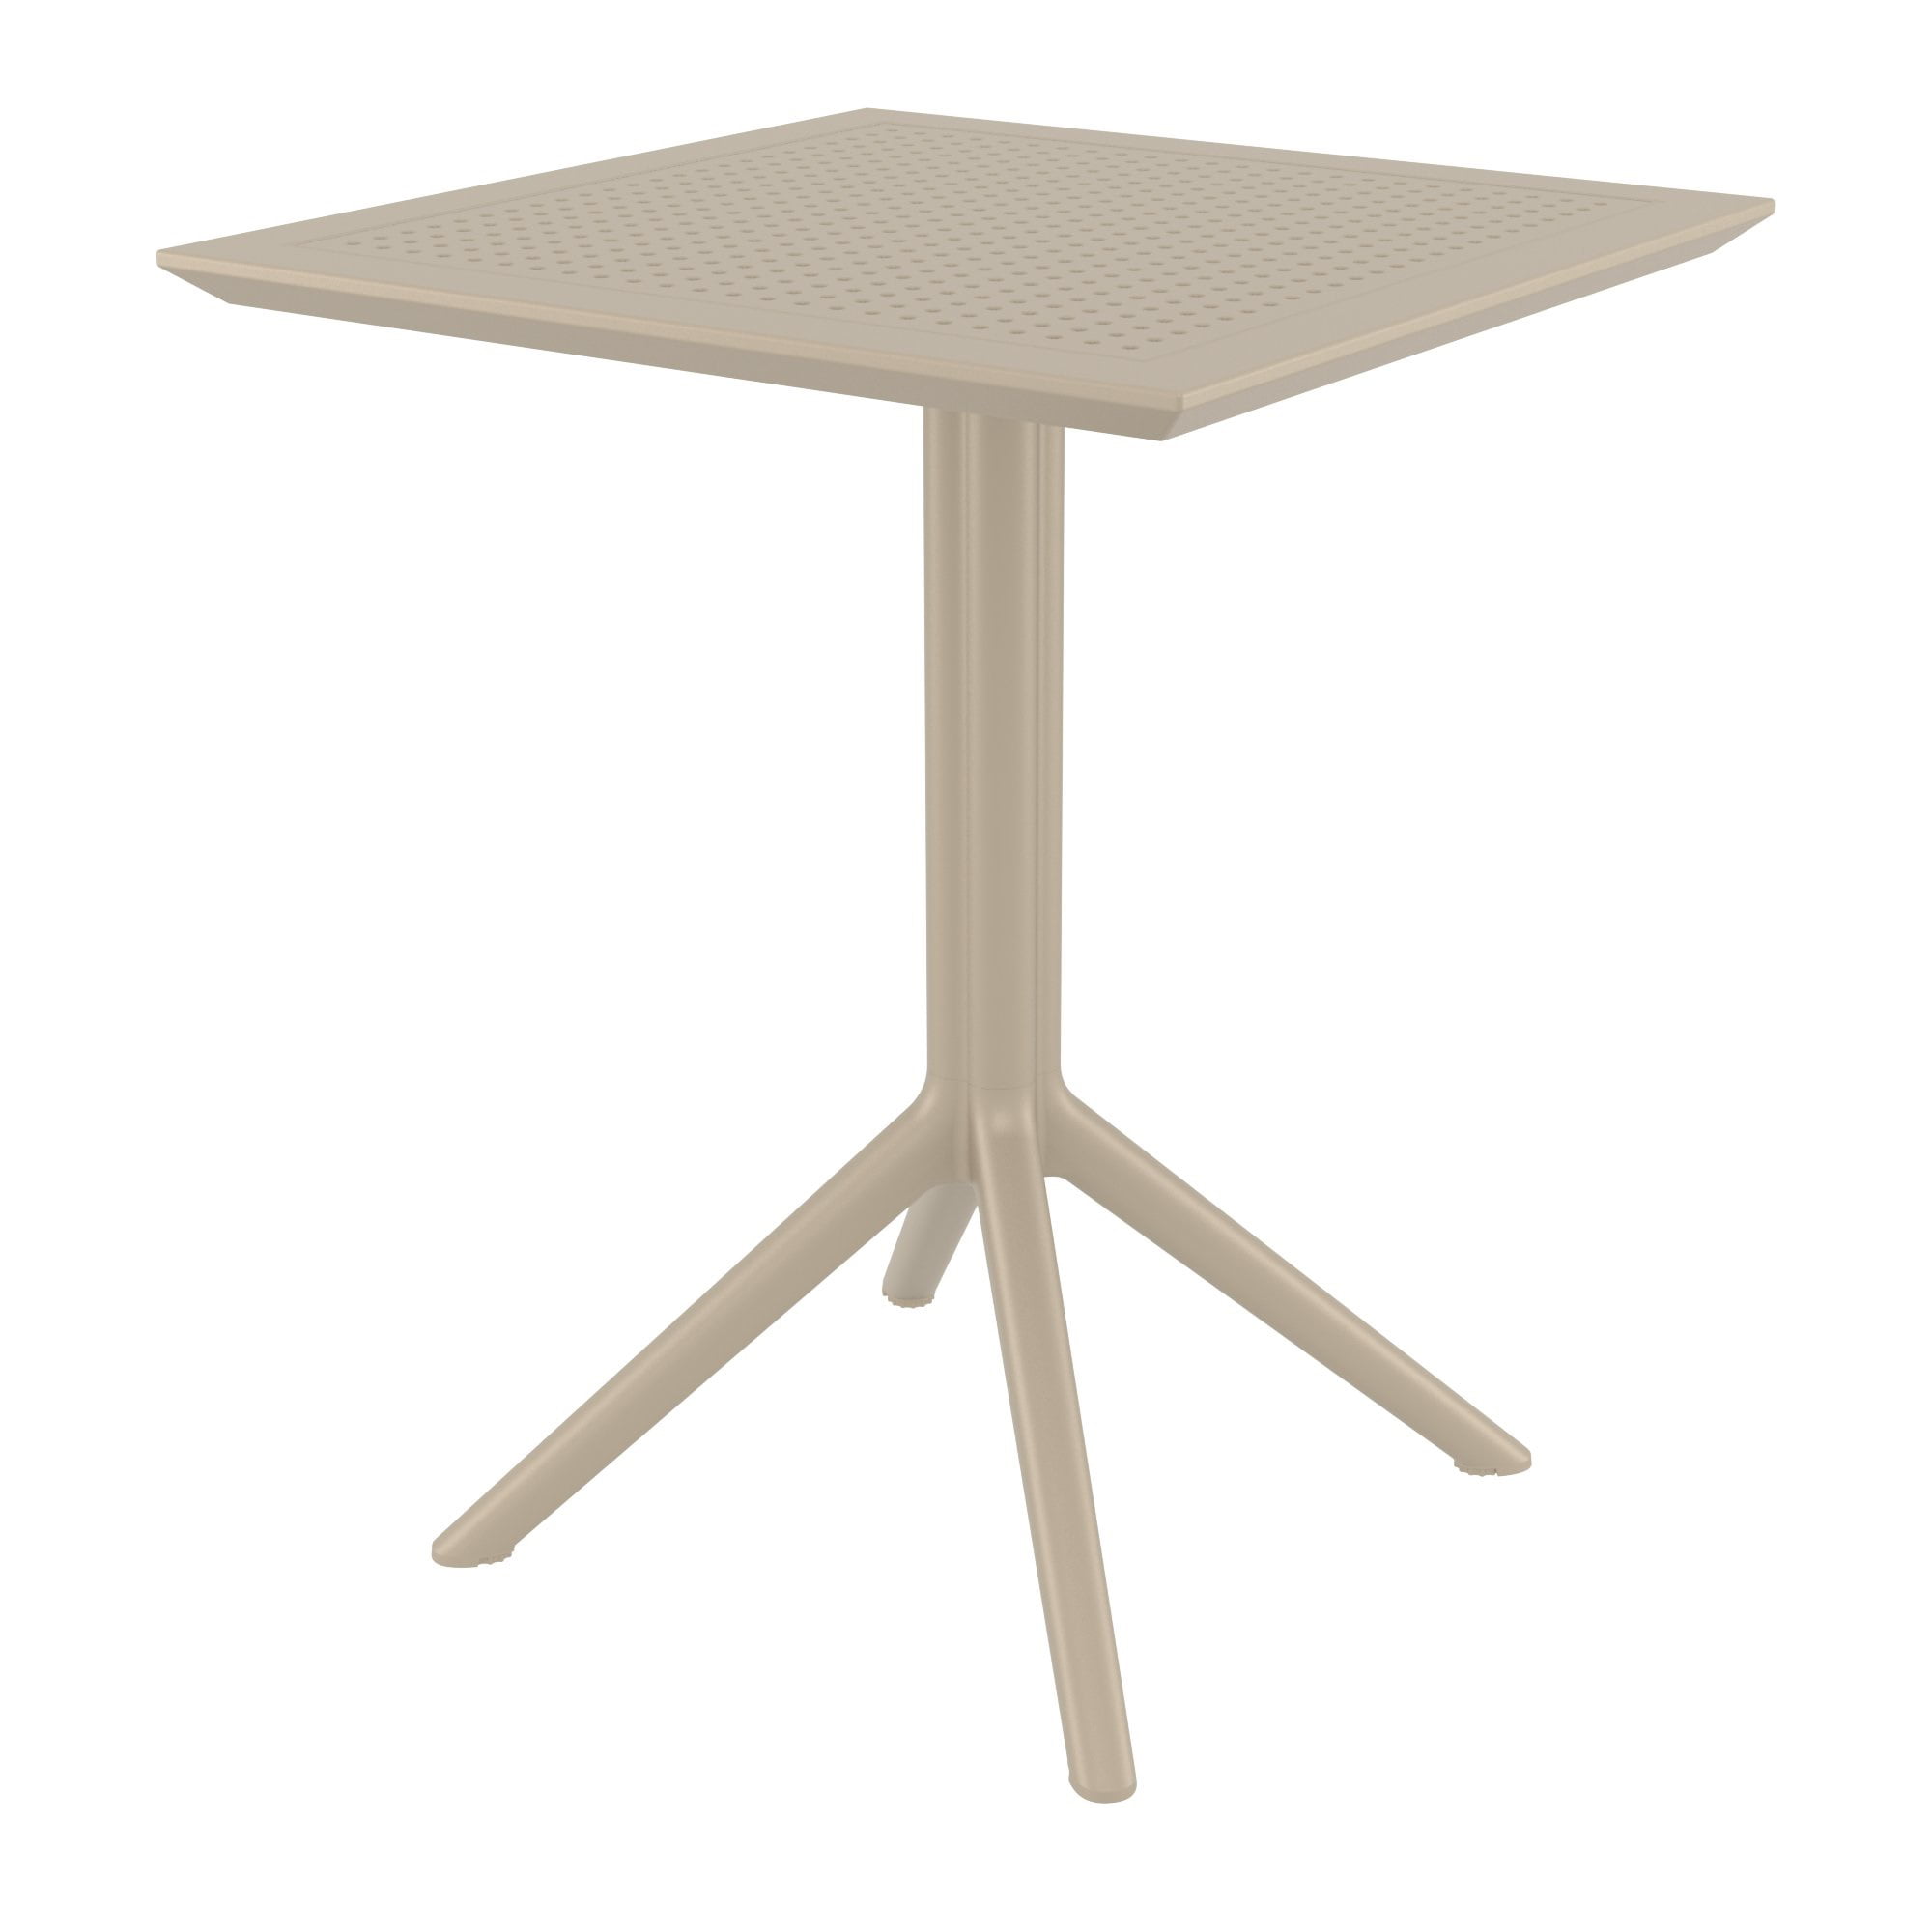 Isp114-dvr 24 In. Sky Square Folding Table - Taupe